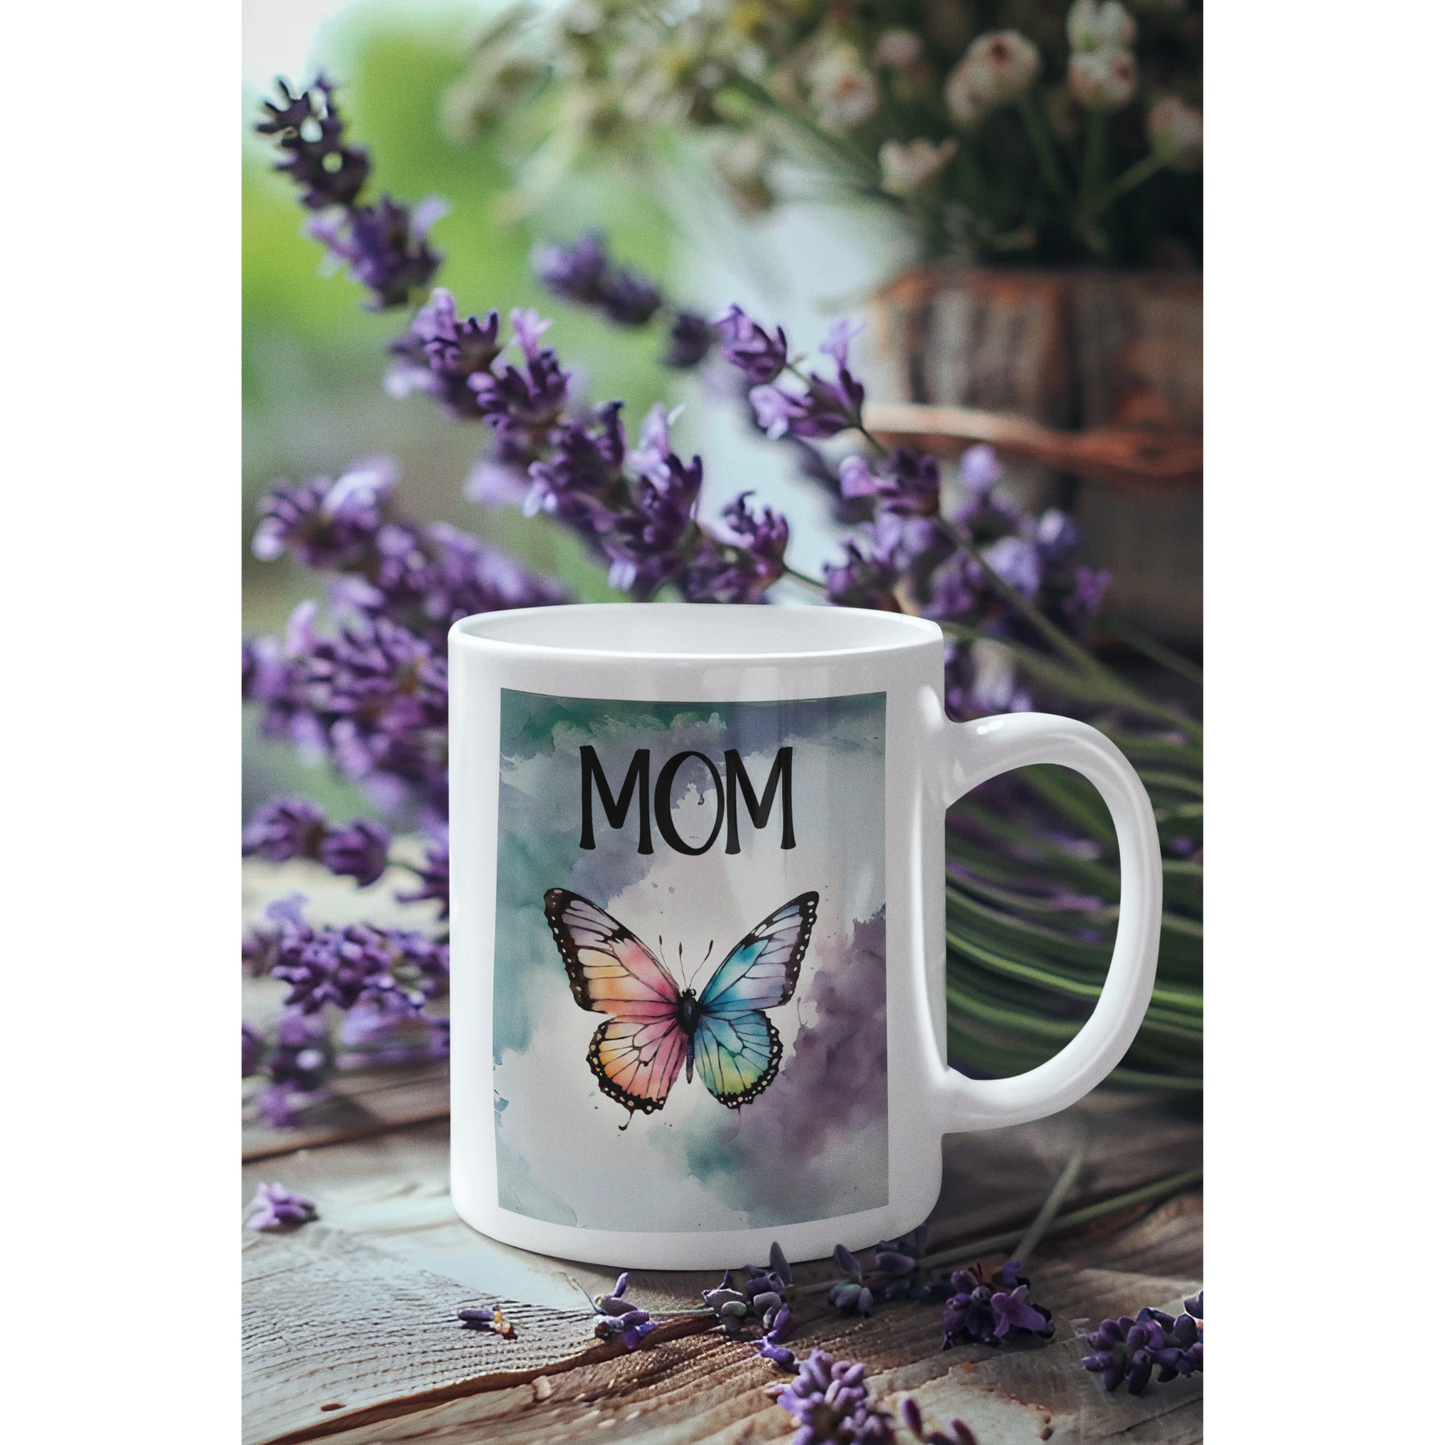 Beautiful Watercolor Mom Coffee Mug with Butterfly Design, 11oz – Perfect Gift for Moms